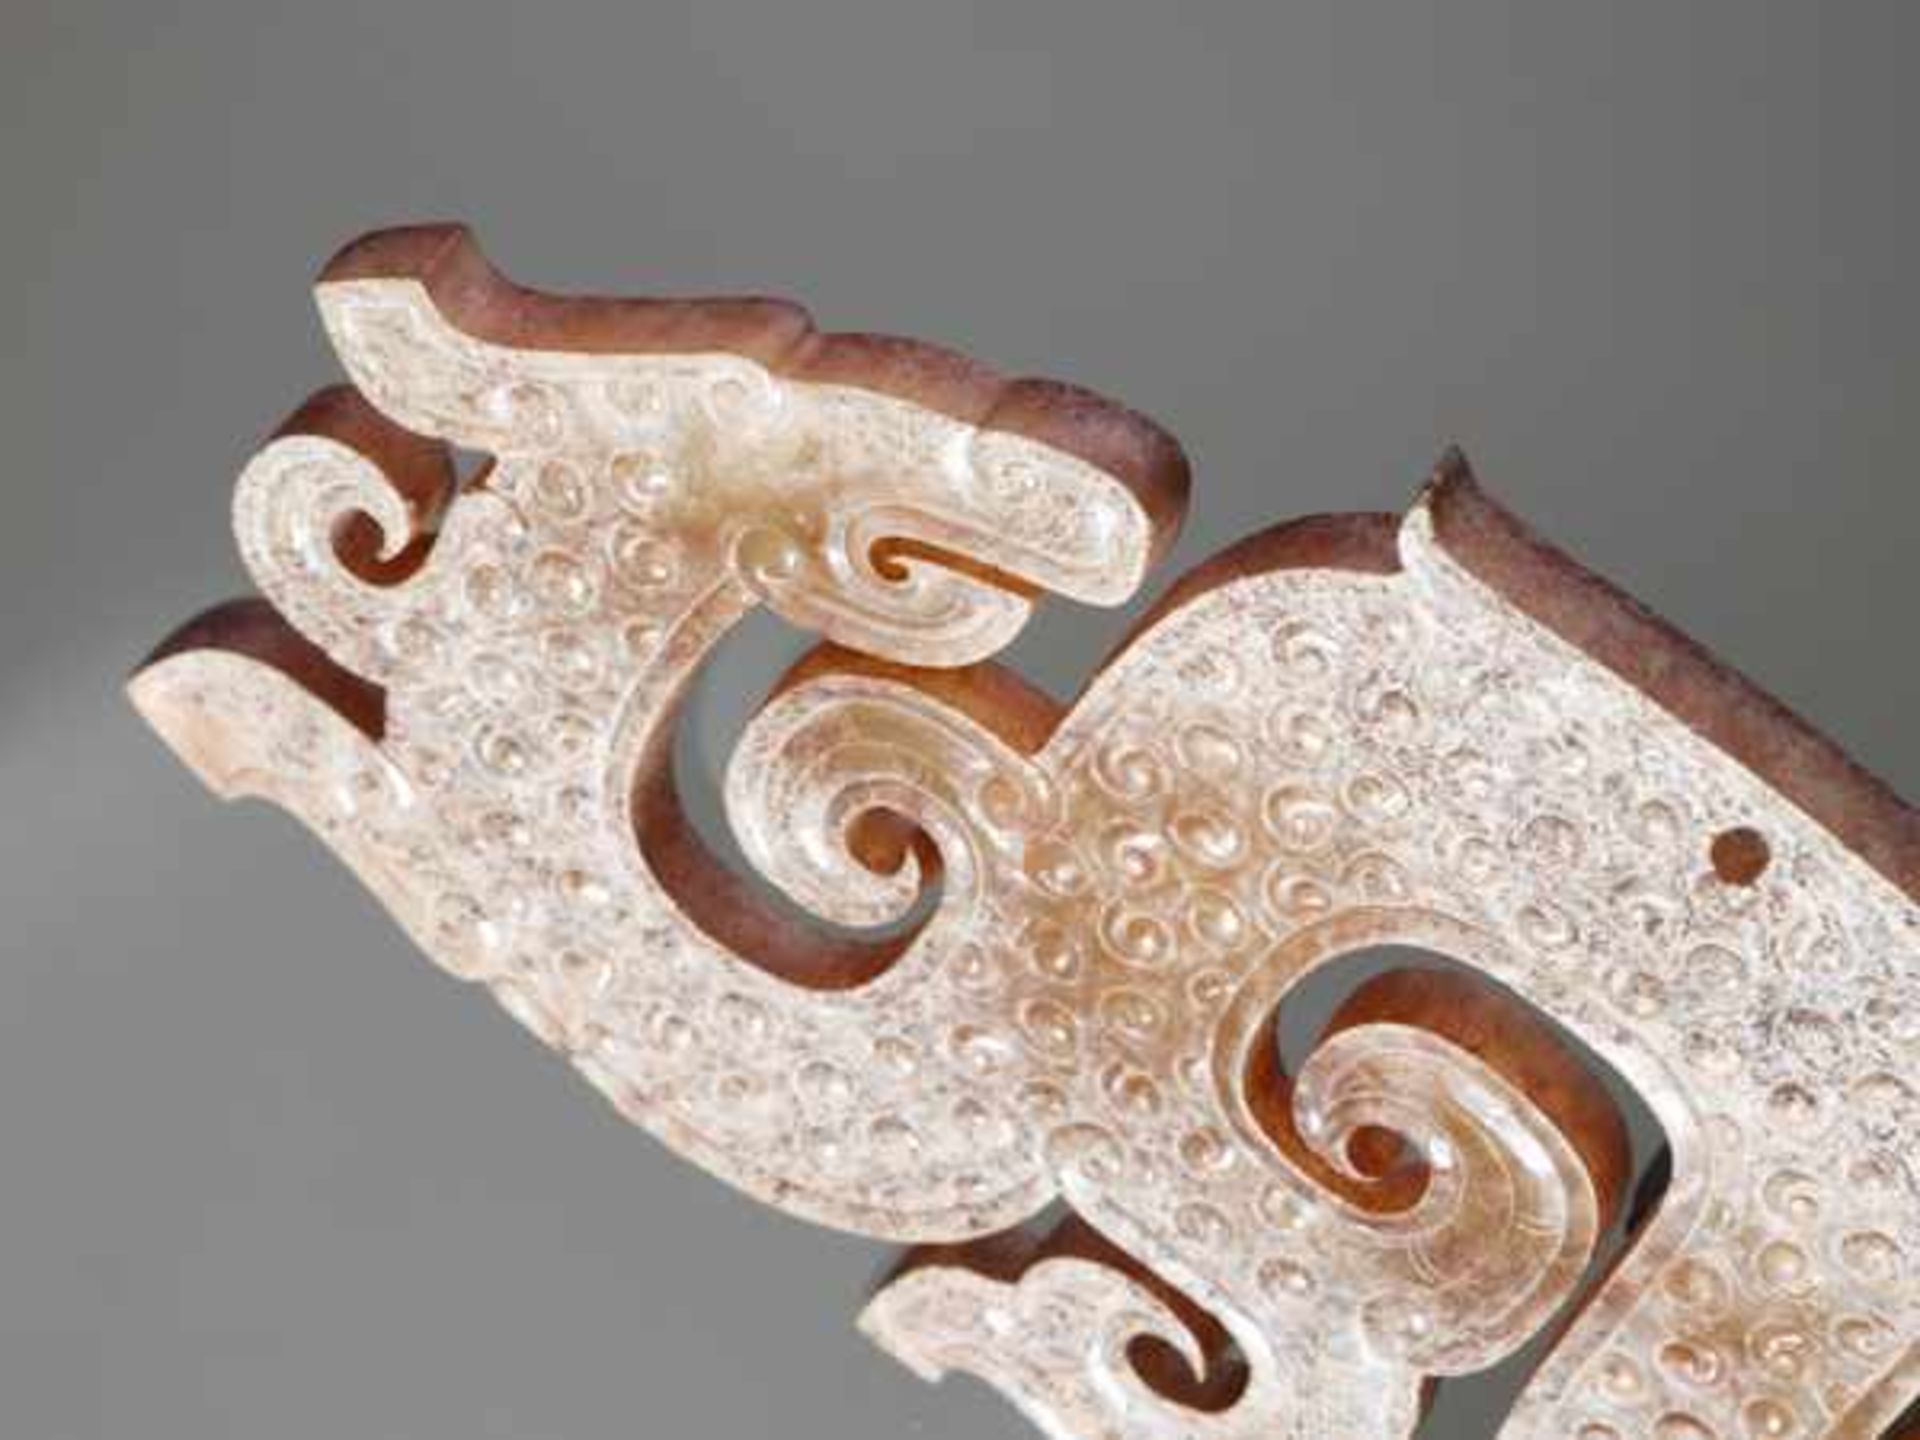 AN ELABORATE DRAGON-SHAPED PENDANT WITH CURLED APPENDAGES Jade, China. Eastern Zhou, 5th - 4th - Image 4 of 4